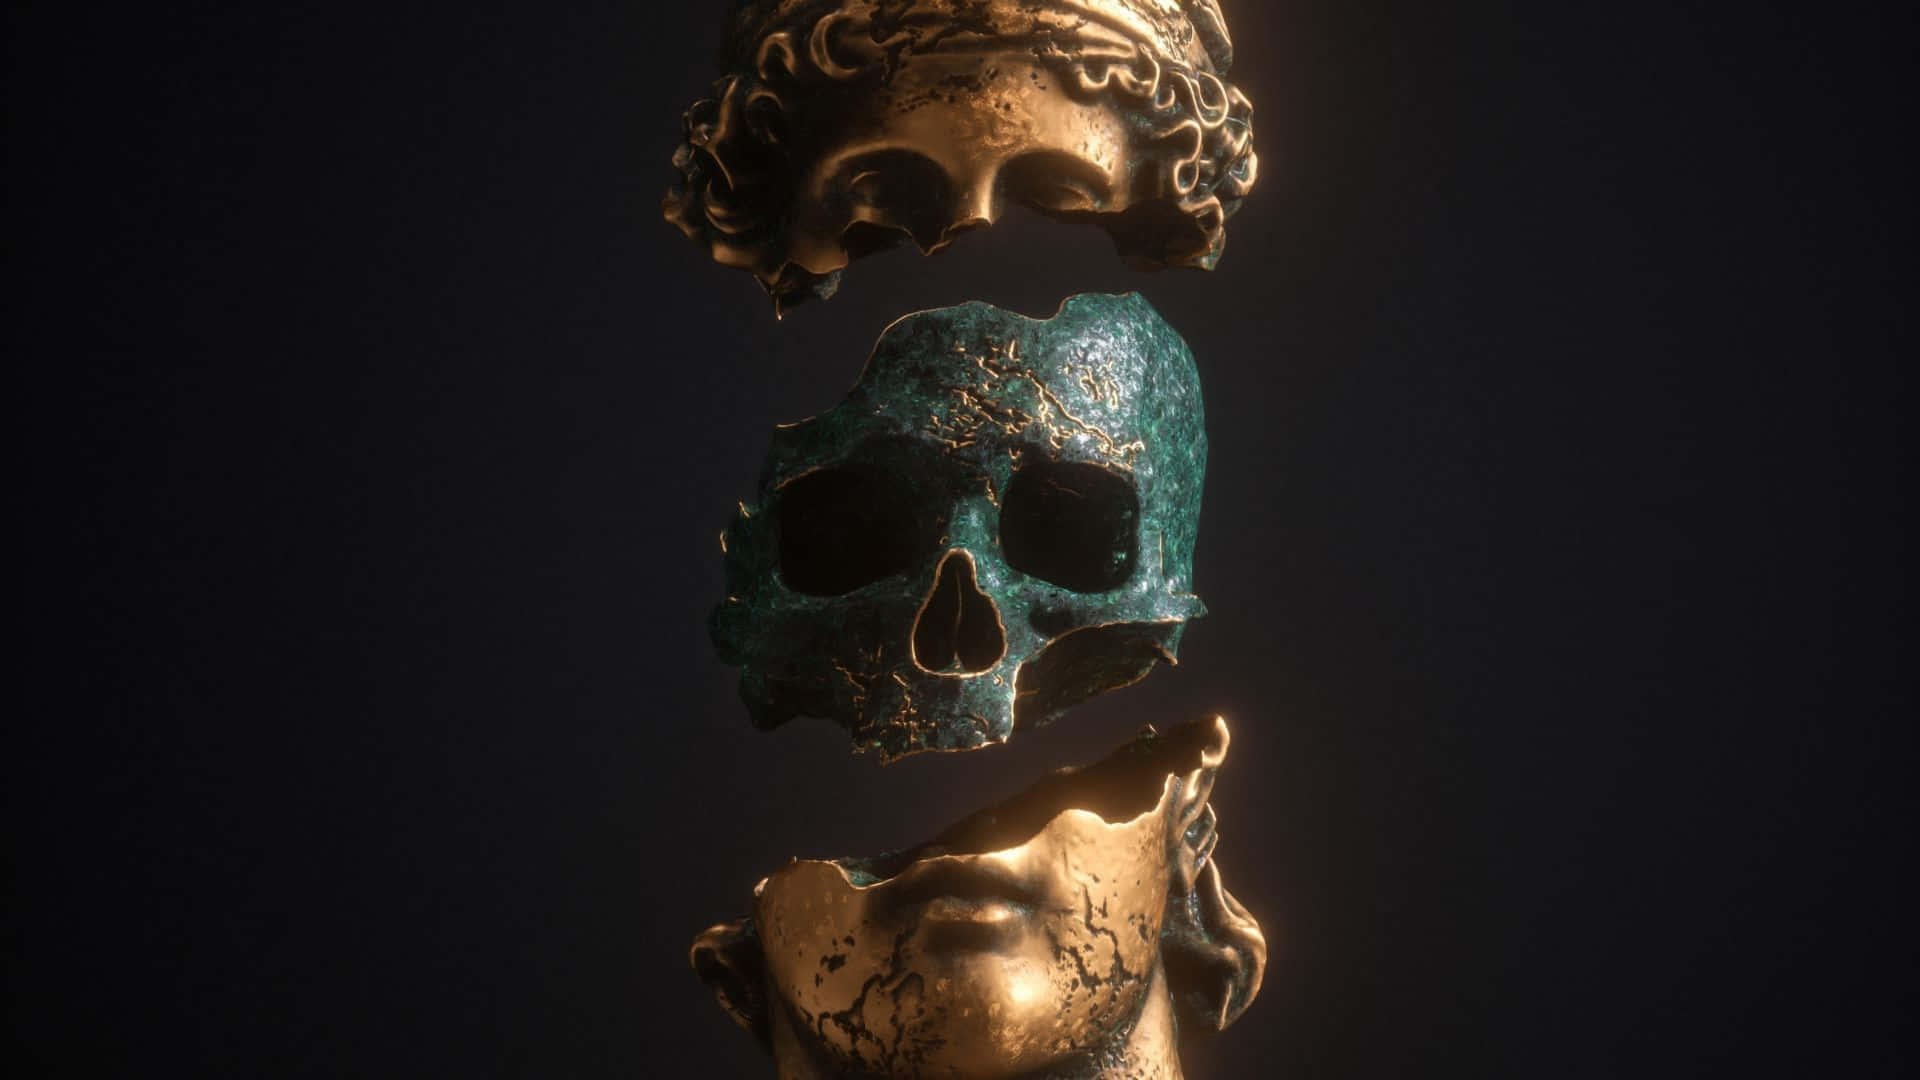 Fragmented Antique Statue Heads Wallpaper